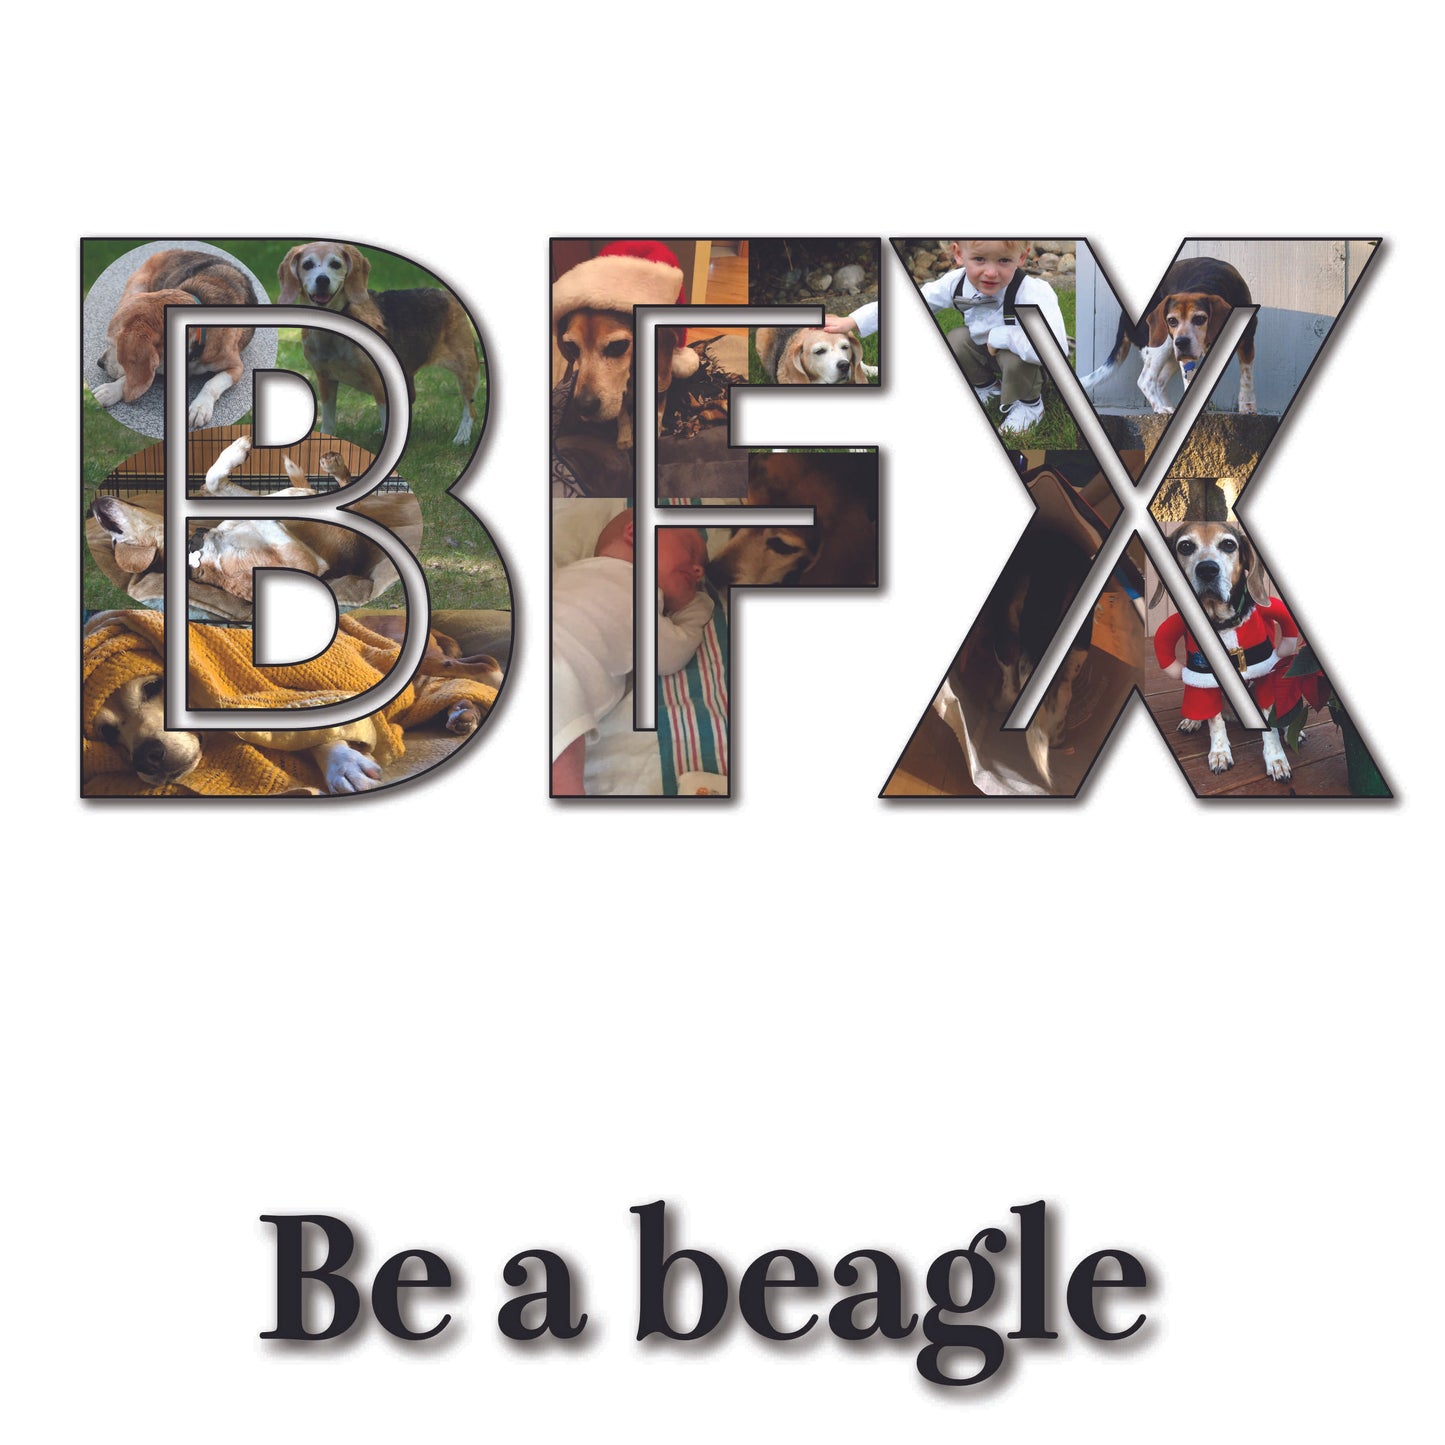 Photo Collage of BFX with beagles inset and "Be a beagle" at bottom